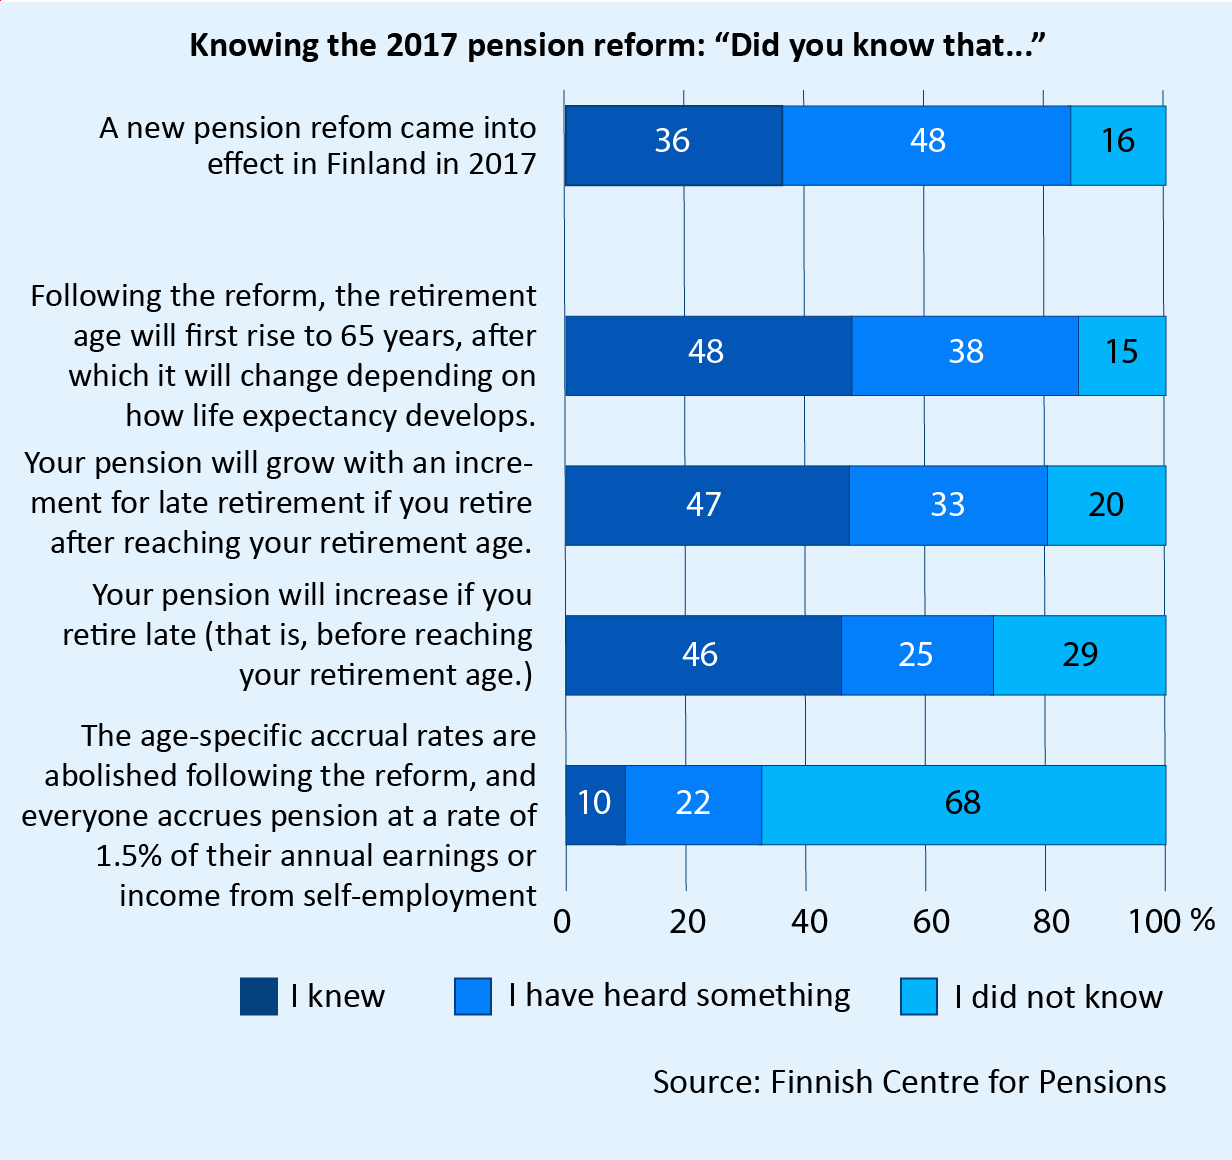 Bar chart of knowledge of 2017 pension reform. Did you know that a pension reform came into force in Finland in 2017? Of the respondents, 36% knew, 48% had heard something about that. 48% knew that the retirement age will rise and 38% had heard something about that. Only 10% knew and 22% had heard something about the abolishment of age-dependant accrual rates. Source: Finnish Centre for Pensions.